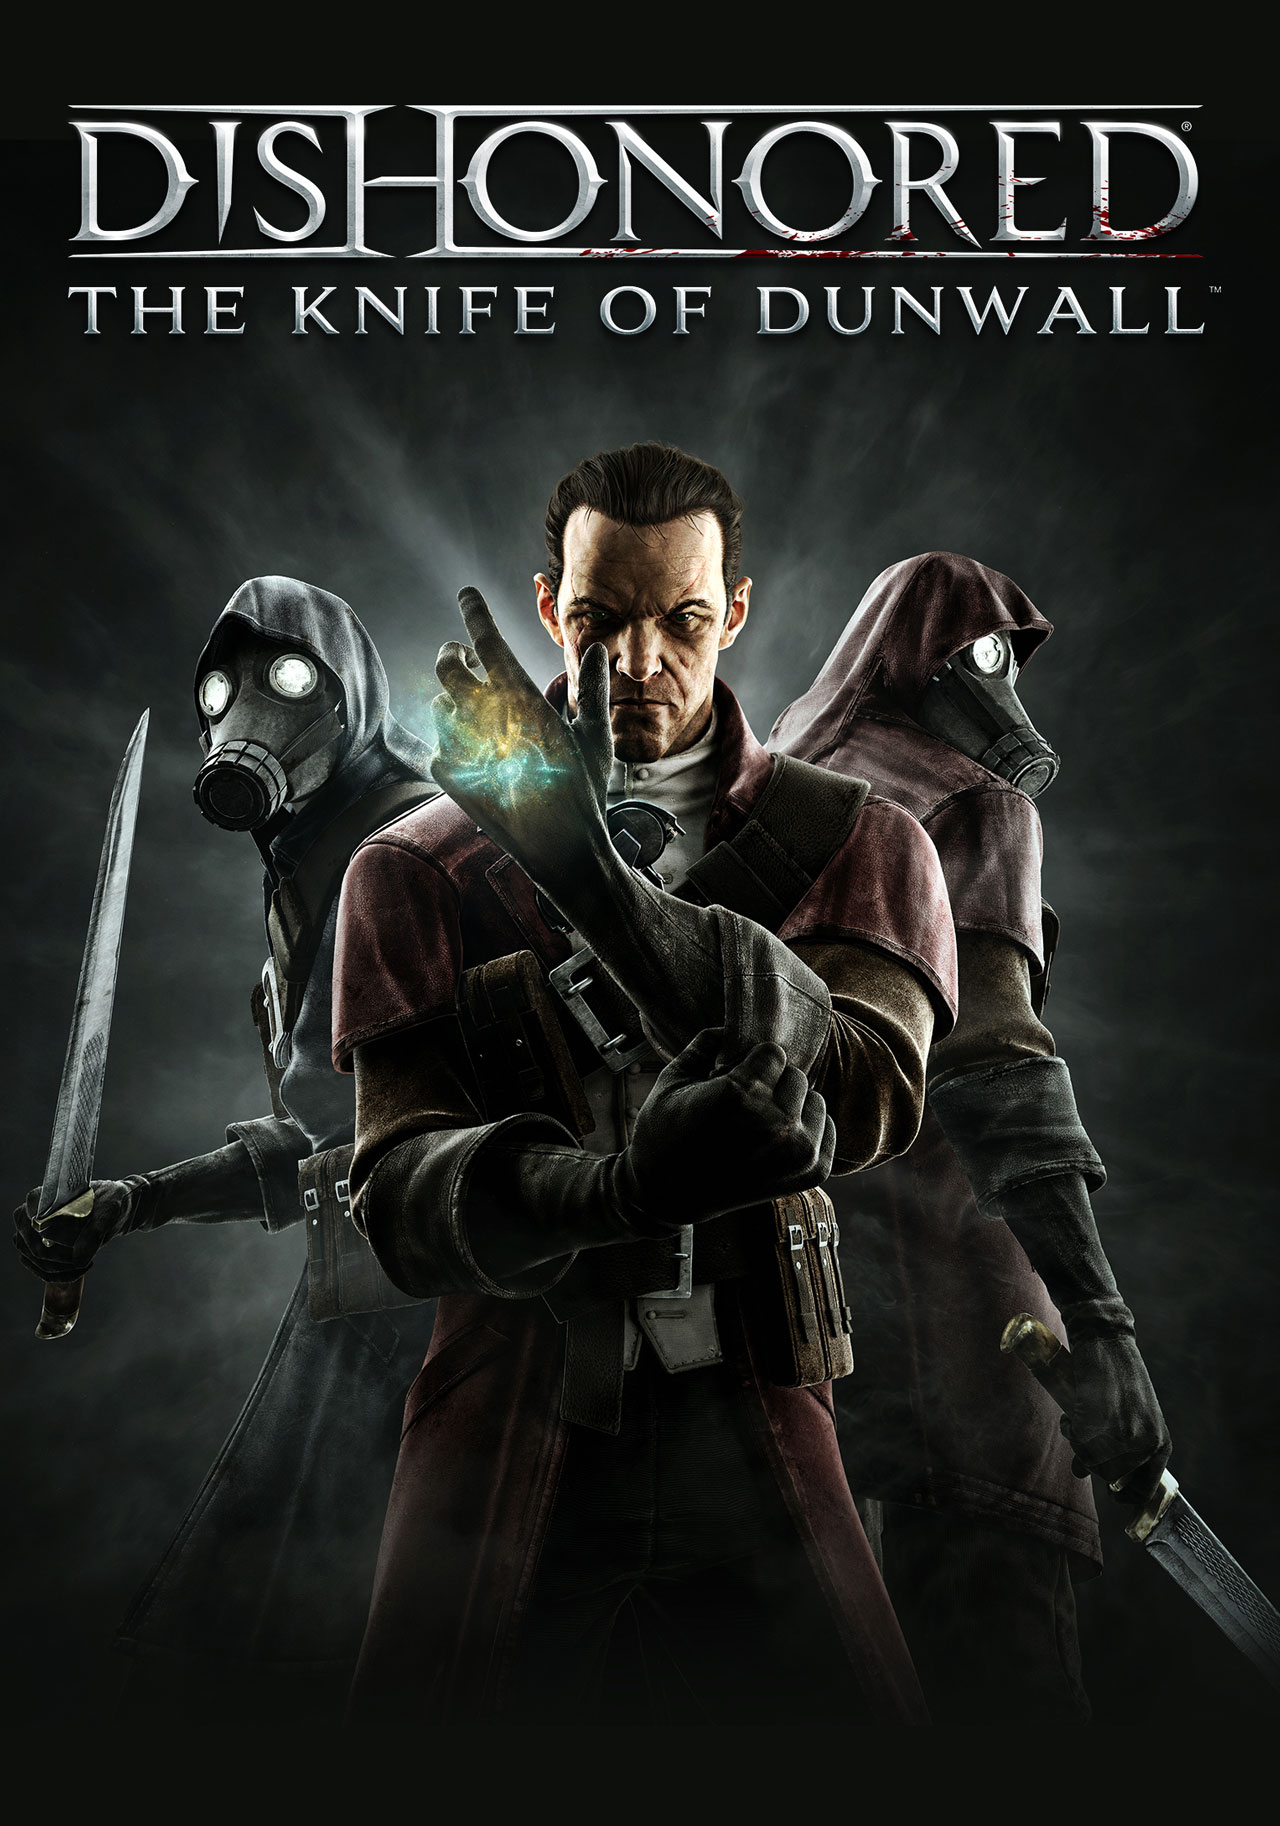 Dishonored: The Knife of Dunwall DLC Announced